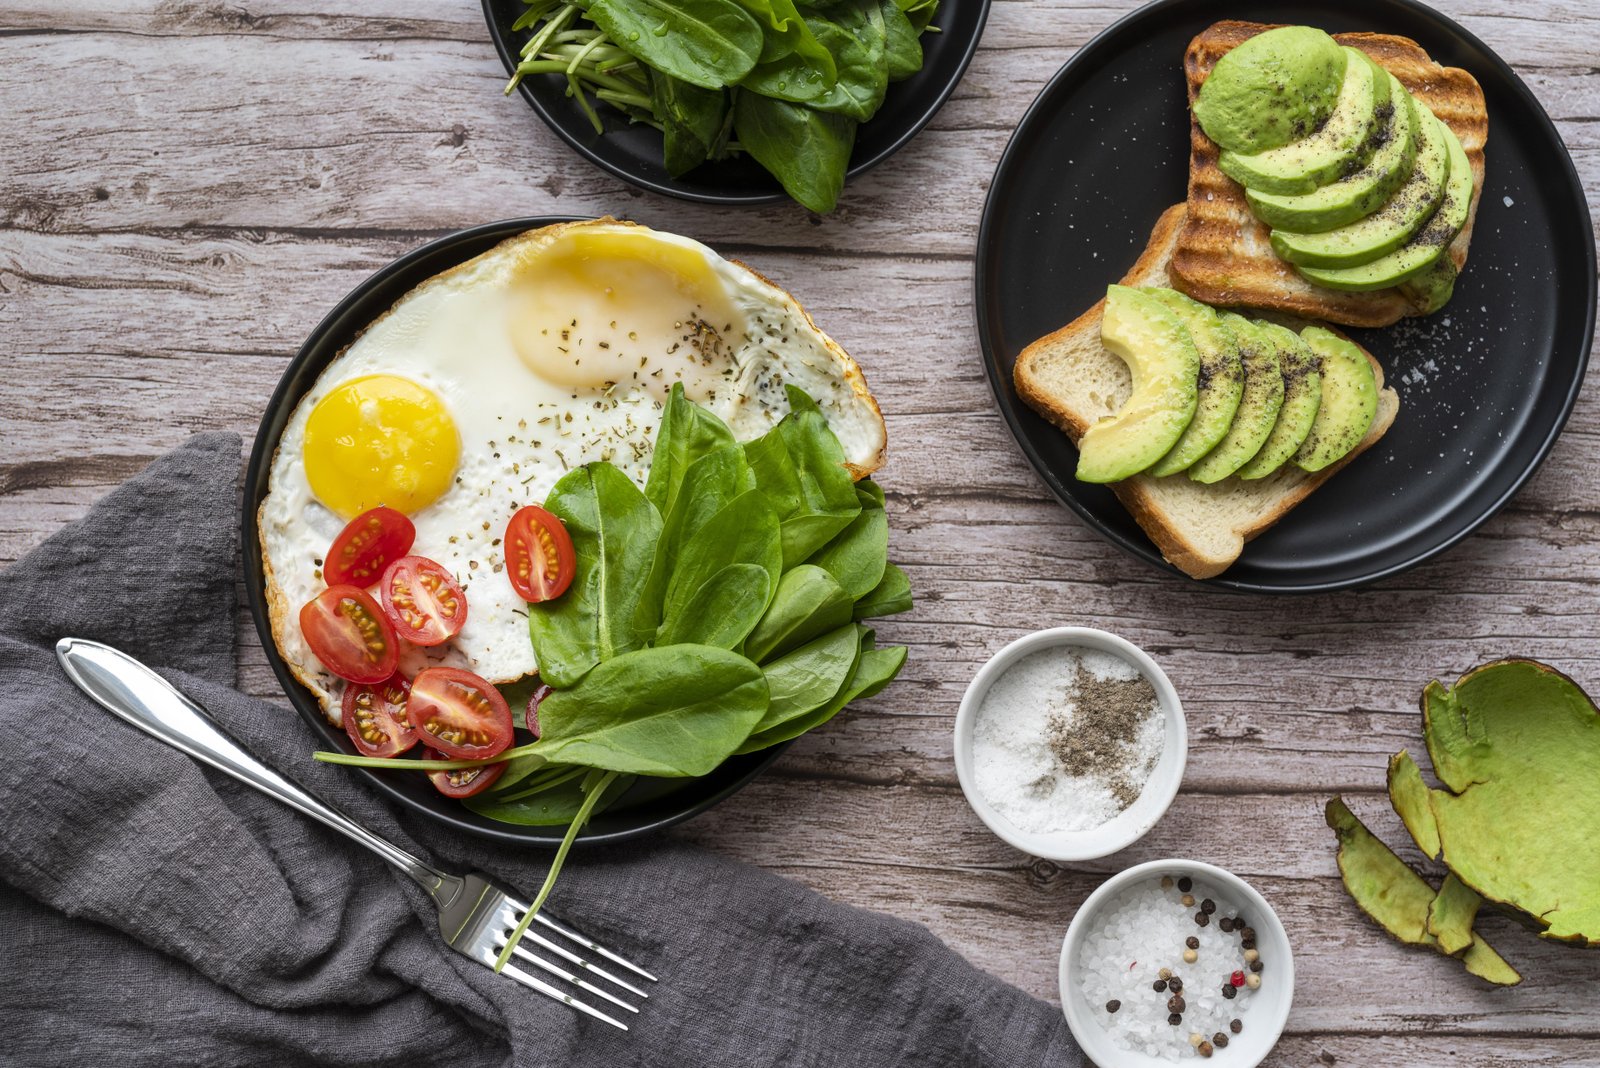 10 Breakfast Recipes With Low-Carb for Any Occasion